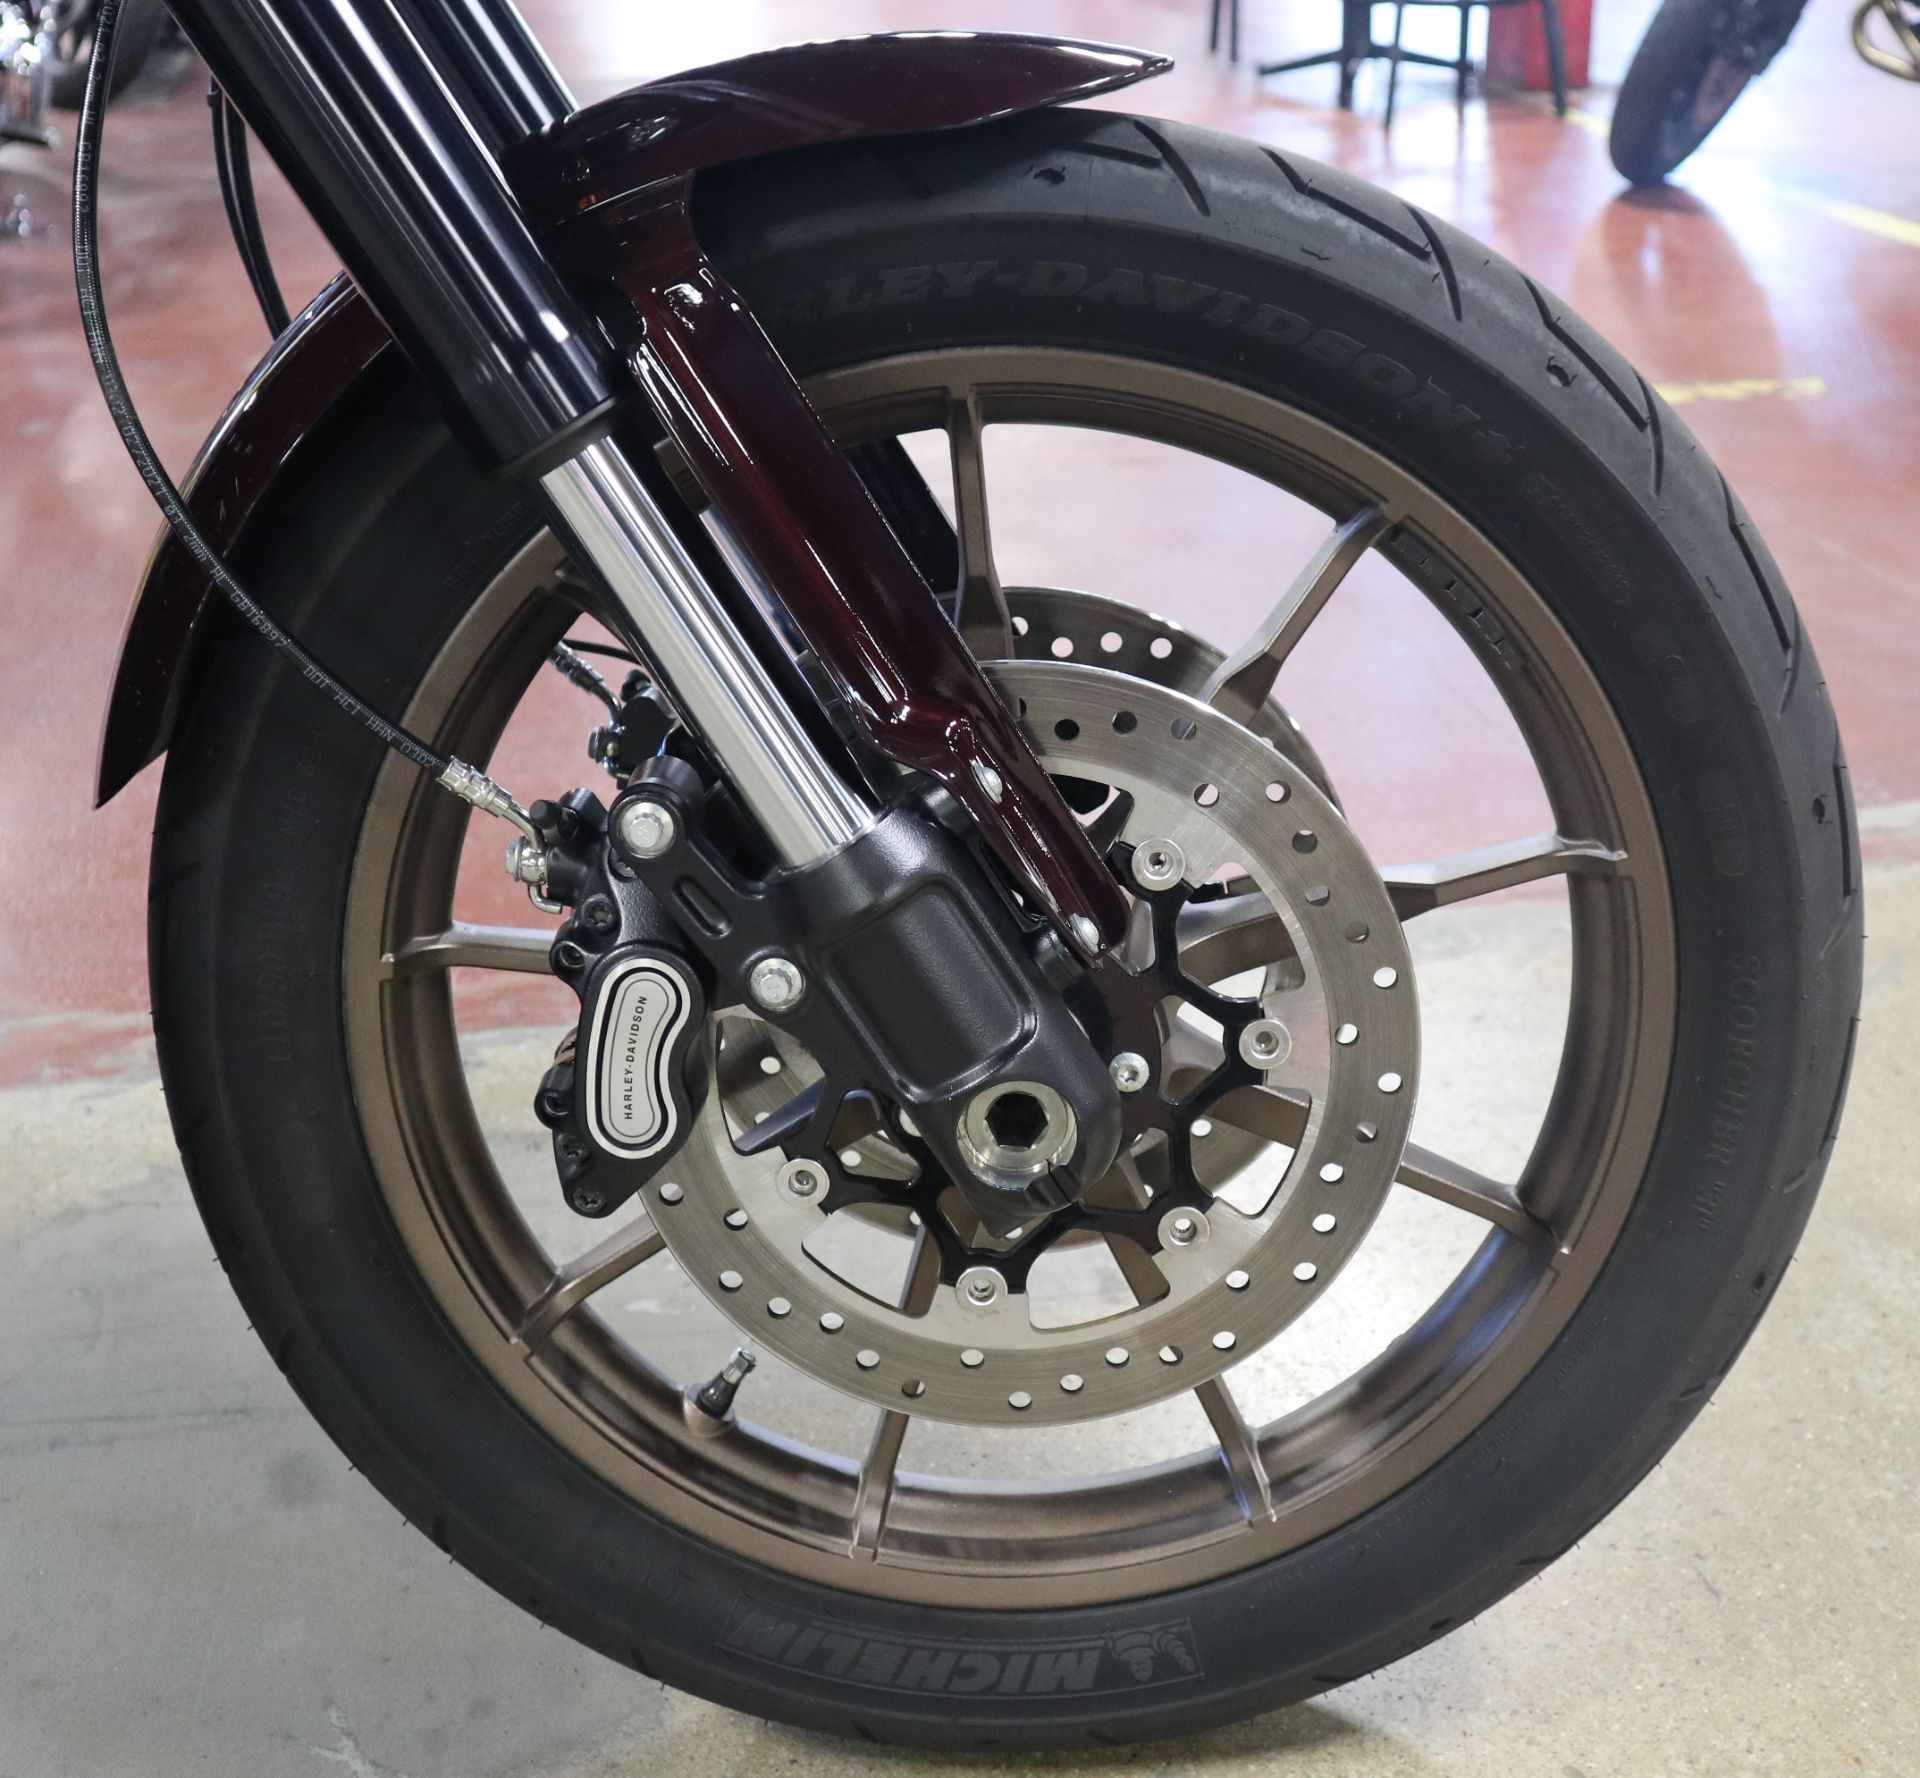 2021 Harley-Davidson Low Rider®S in New London, Connecticut - Photo 15